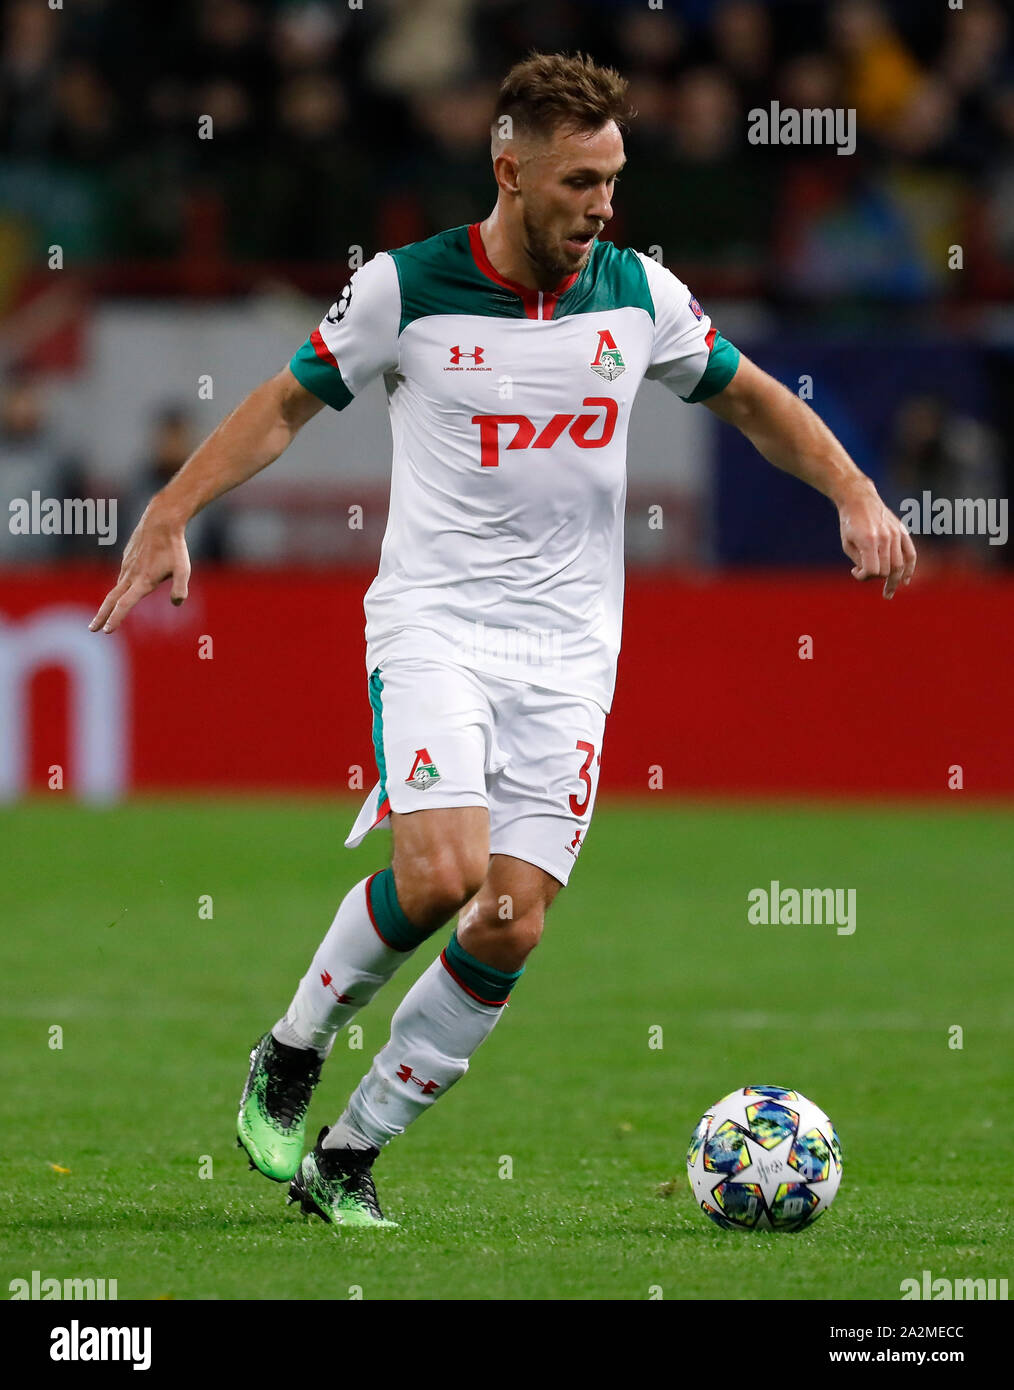 MOSCOW, RUSSIA - OCTOBER 01: Maciej Rybus of Lokomotiv Moskva during the UEFA Champions League group D match between Lokomotiv Moskva and Atletico Madrid at RZD Arena on October 1, 2019 in Moscow, Russia. (Photo by MB Media) Stock Photo